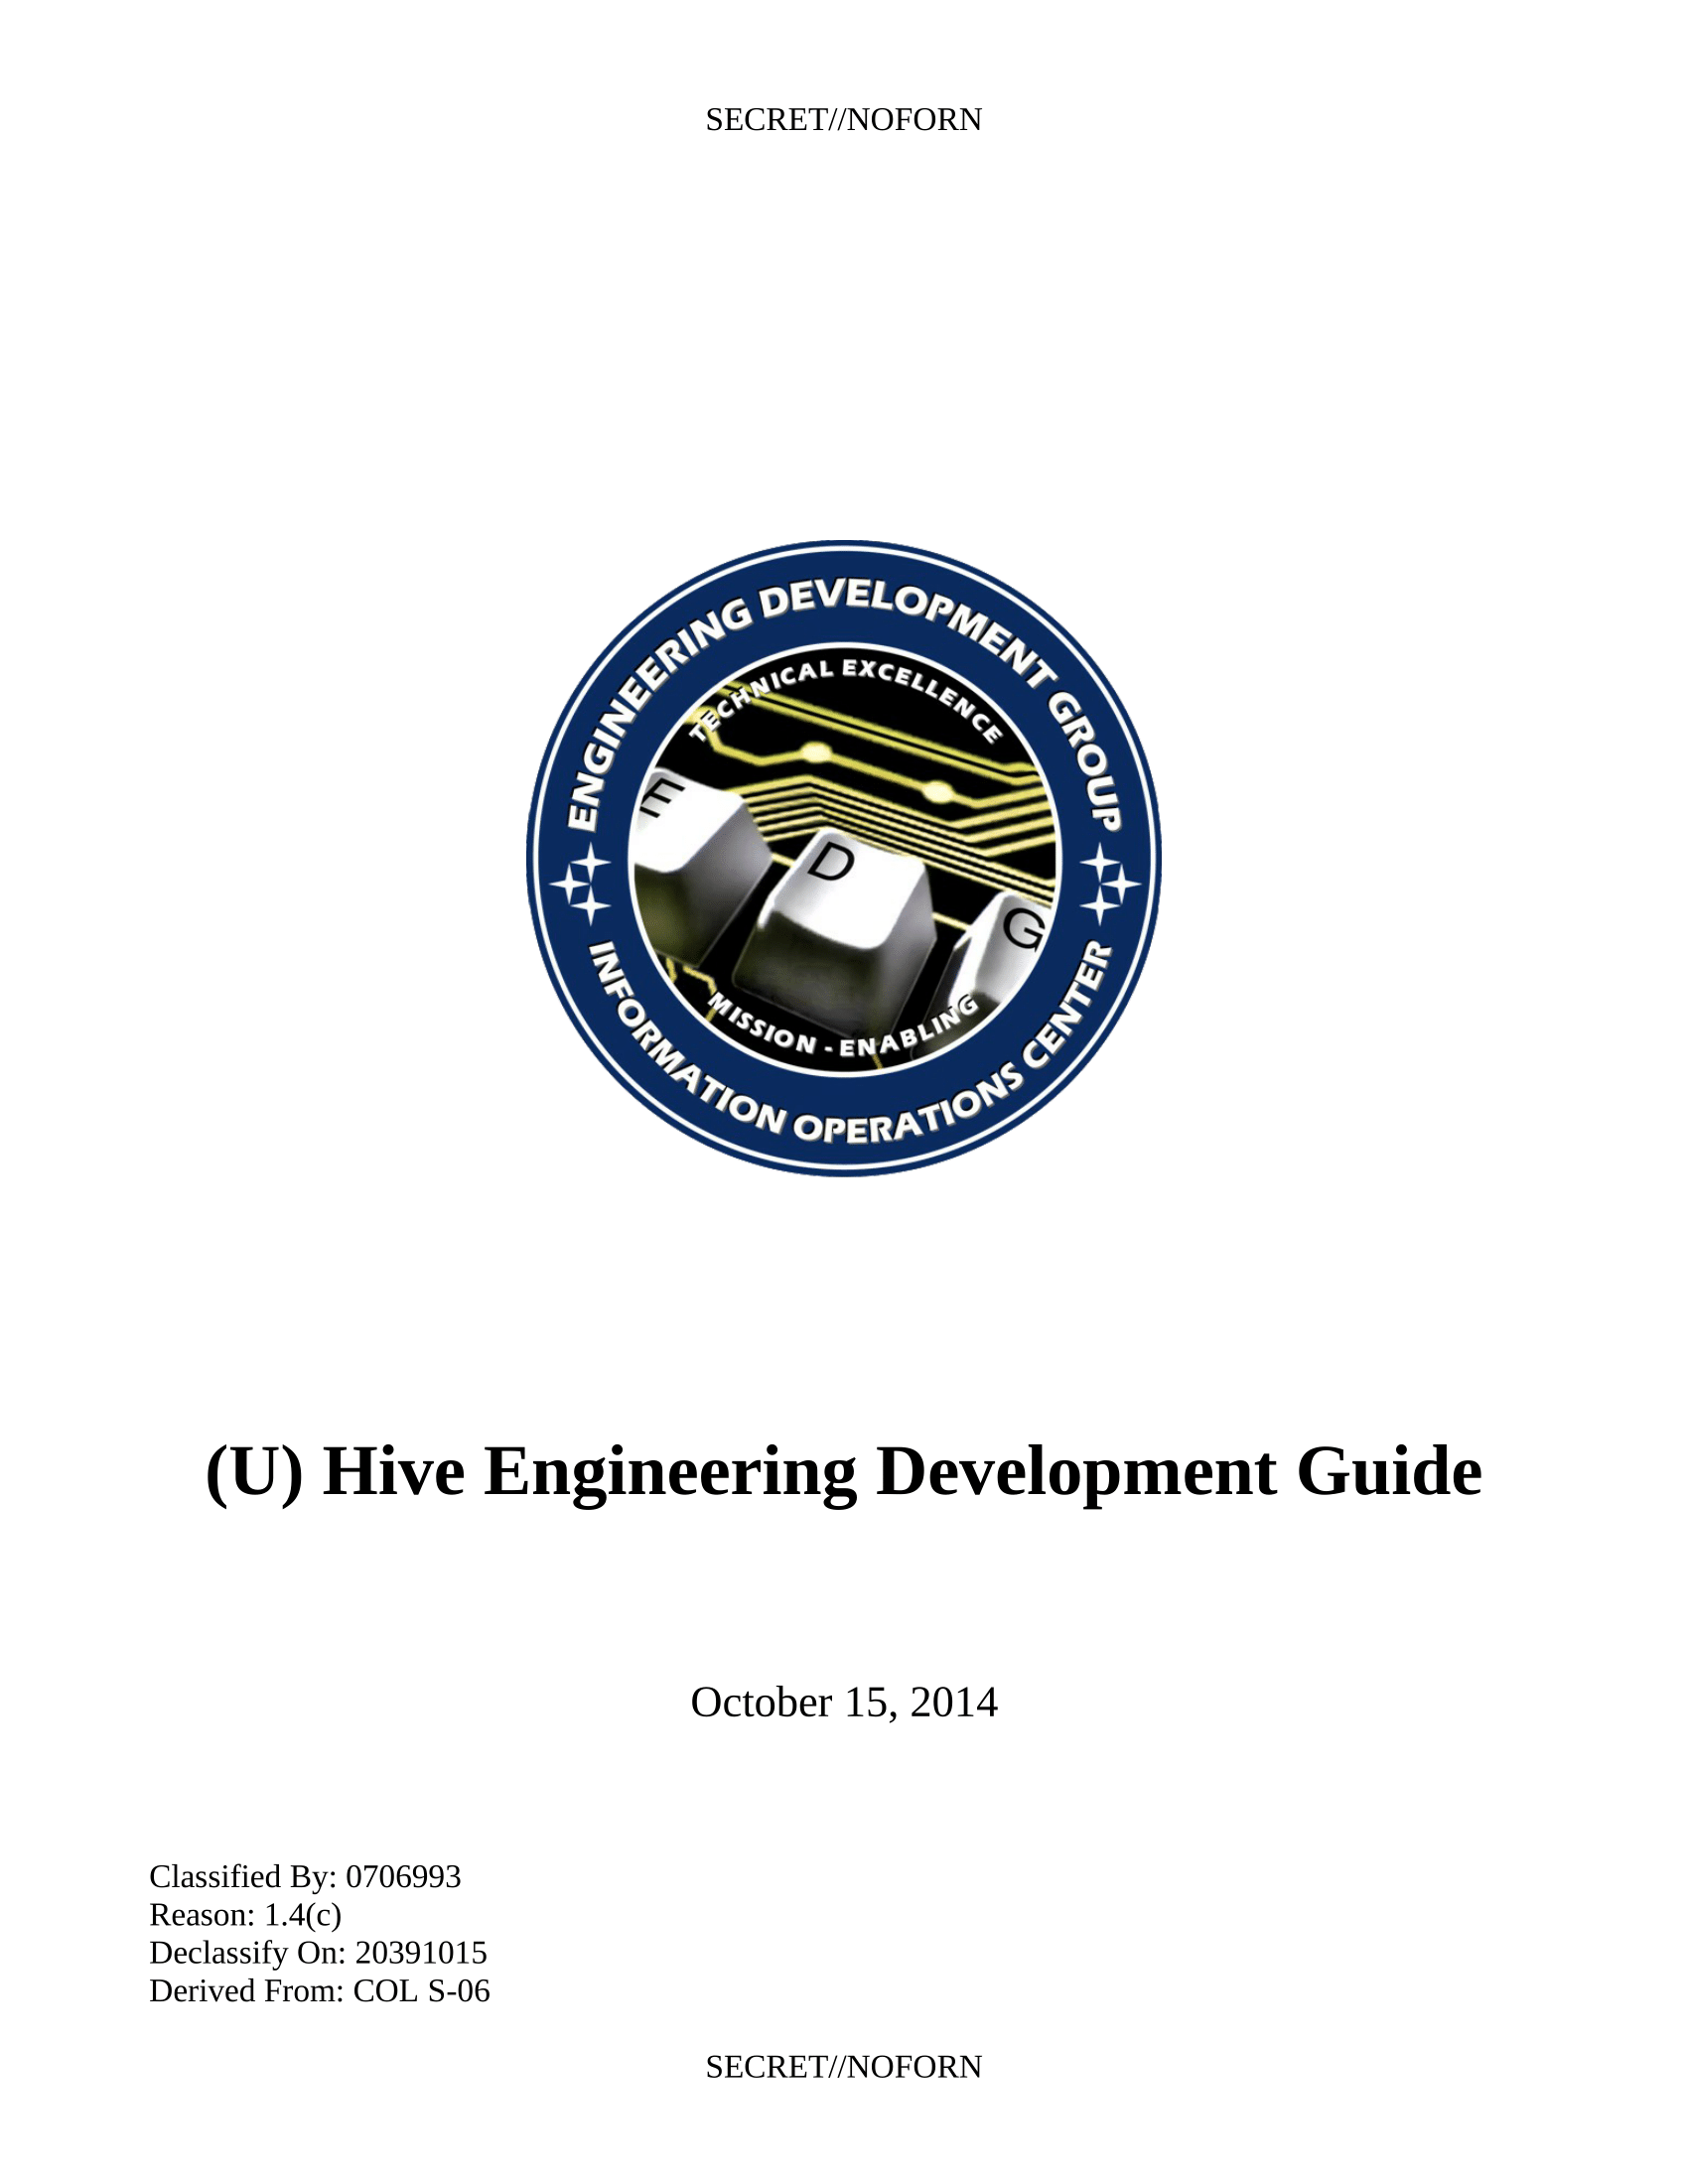 hive-DevelopersGuide-01.png